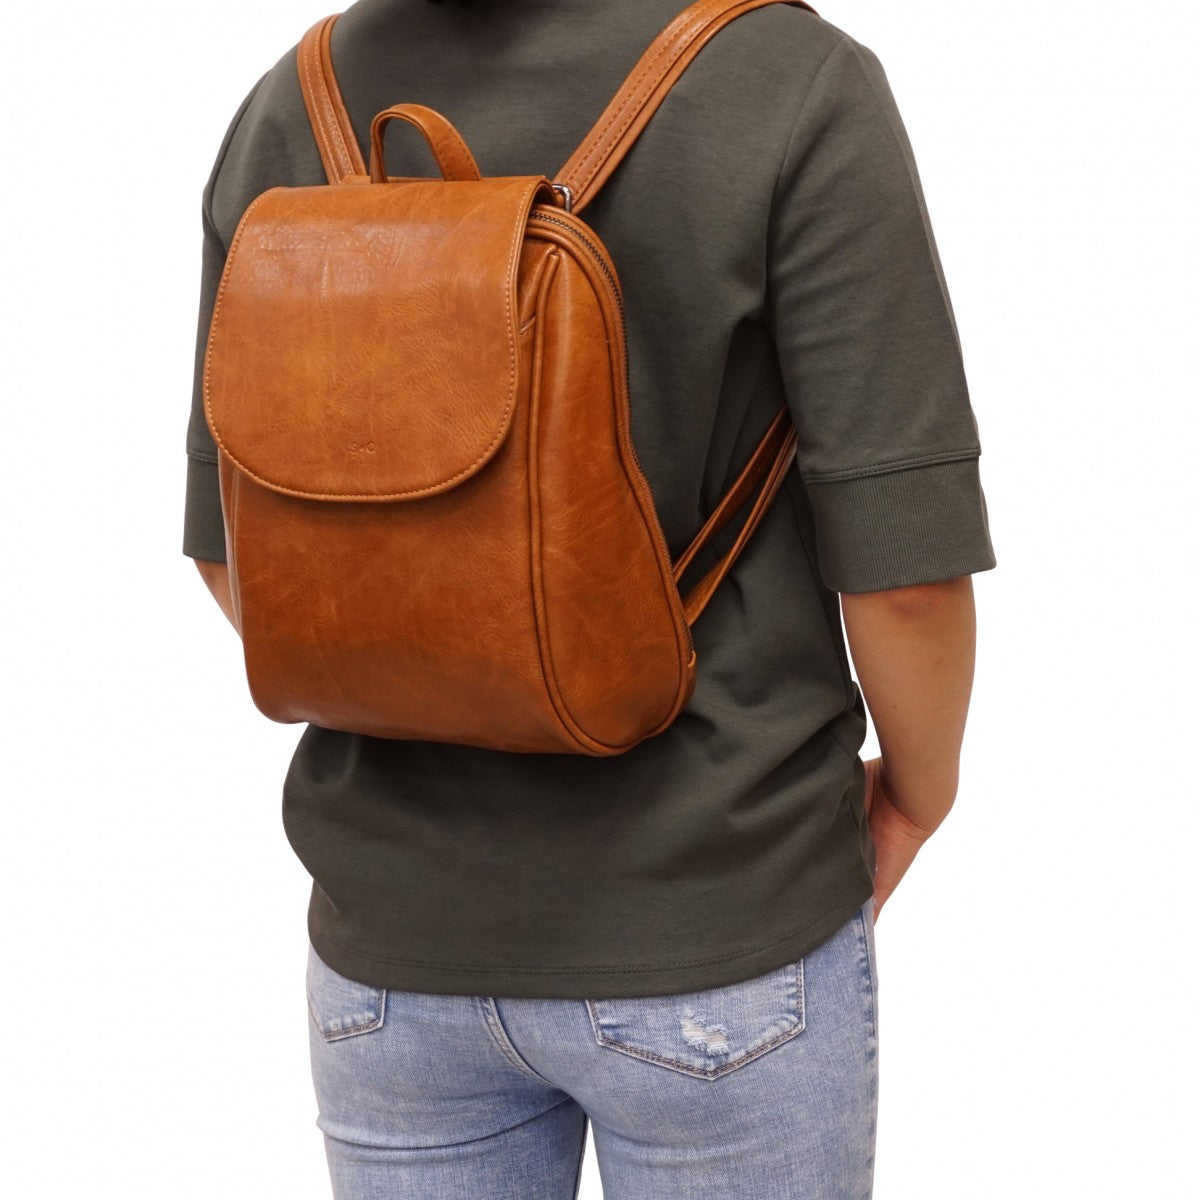 S-Q JADA CONVERTIBLE BACKPACK IN CAMEL